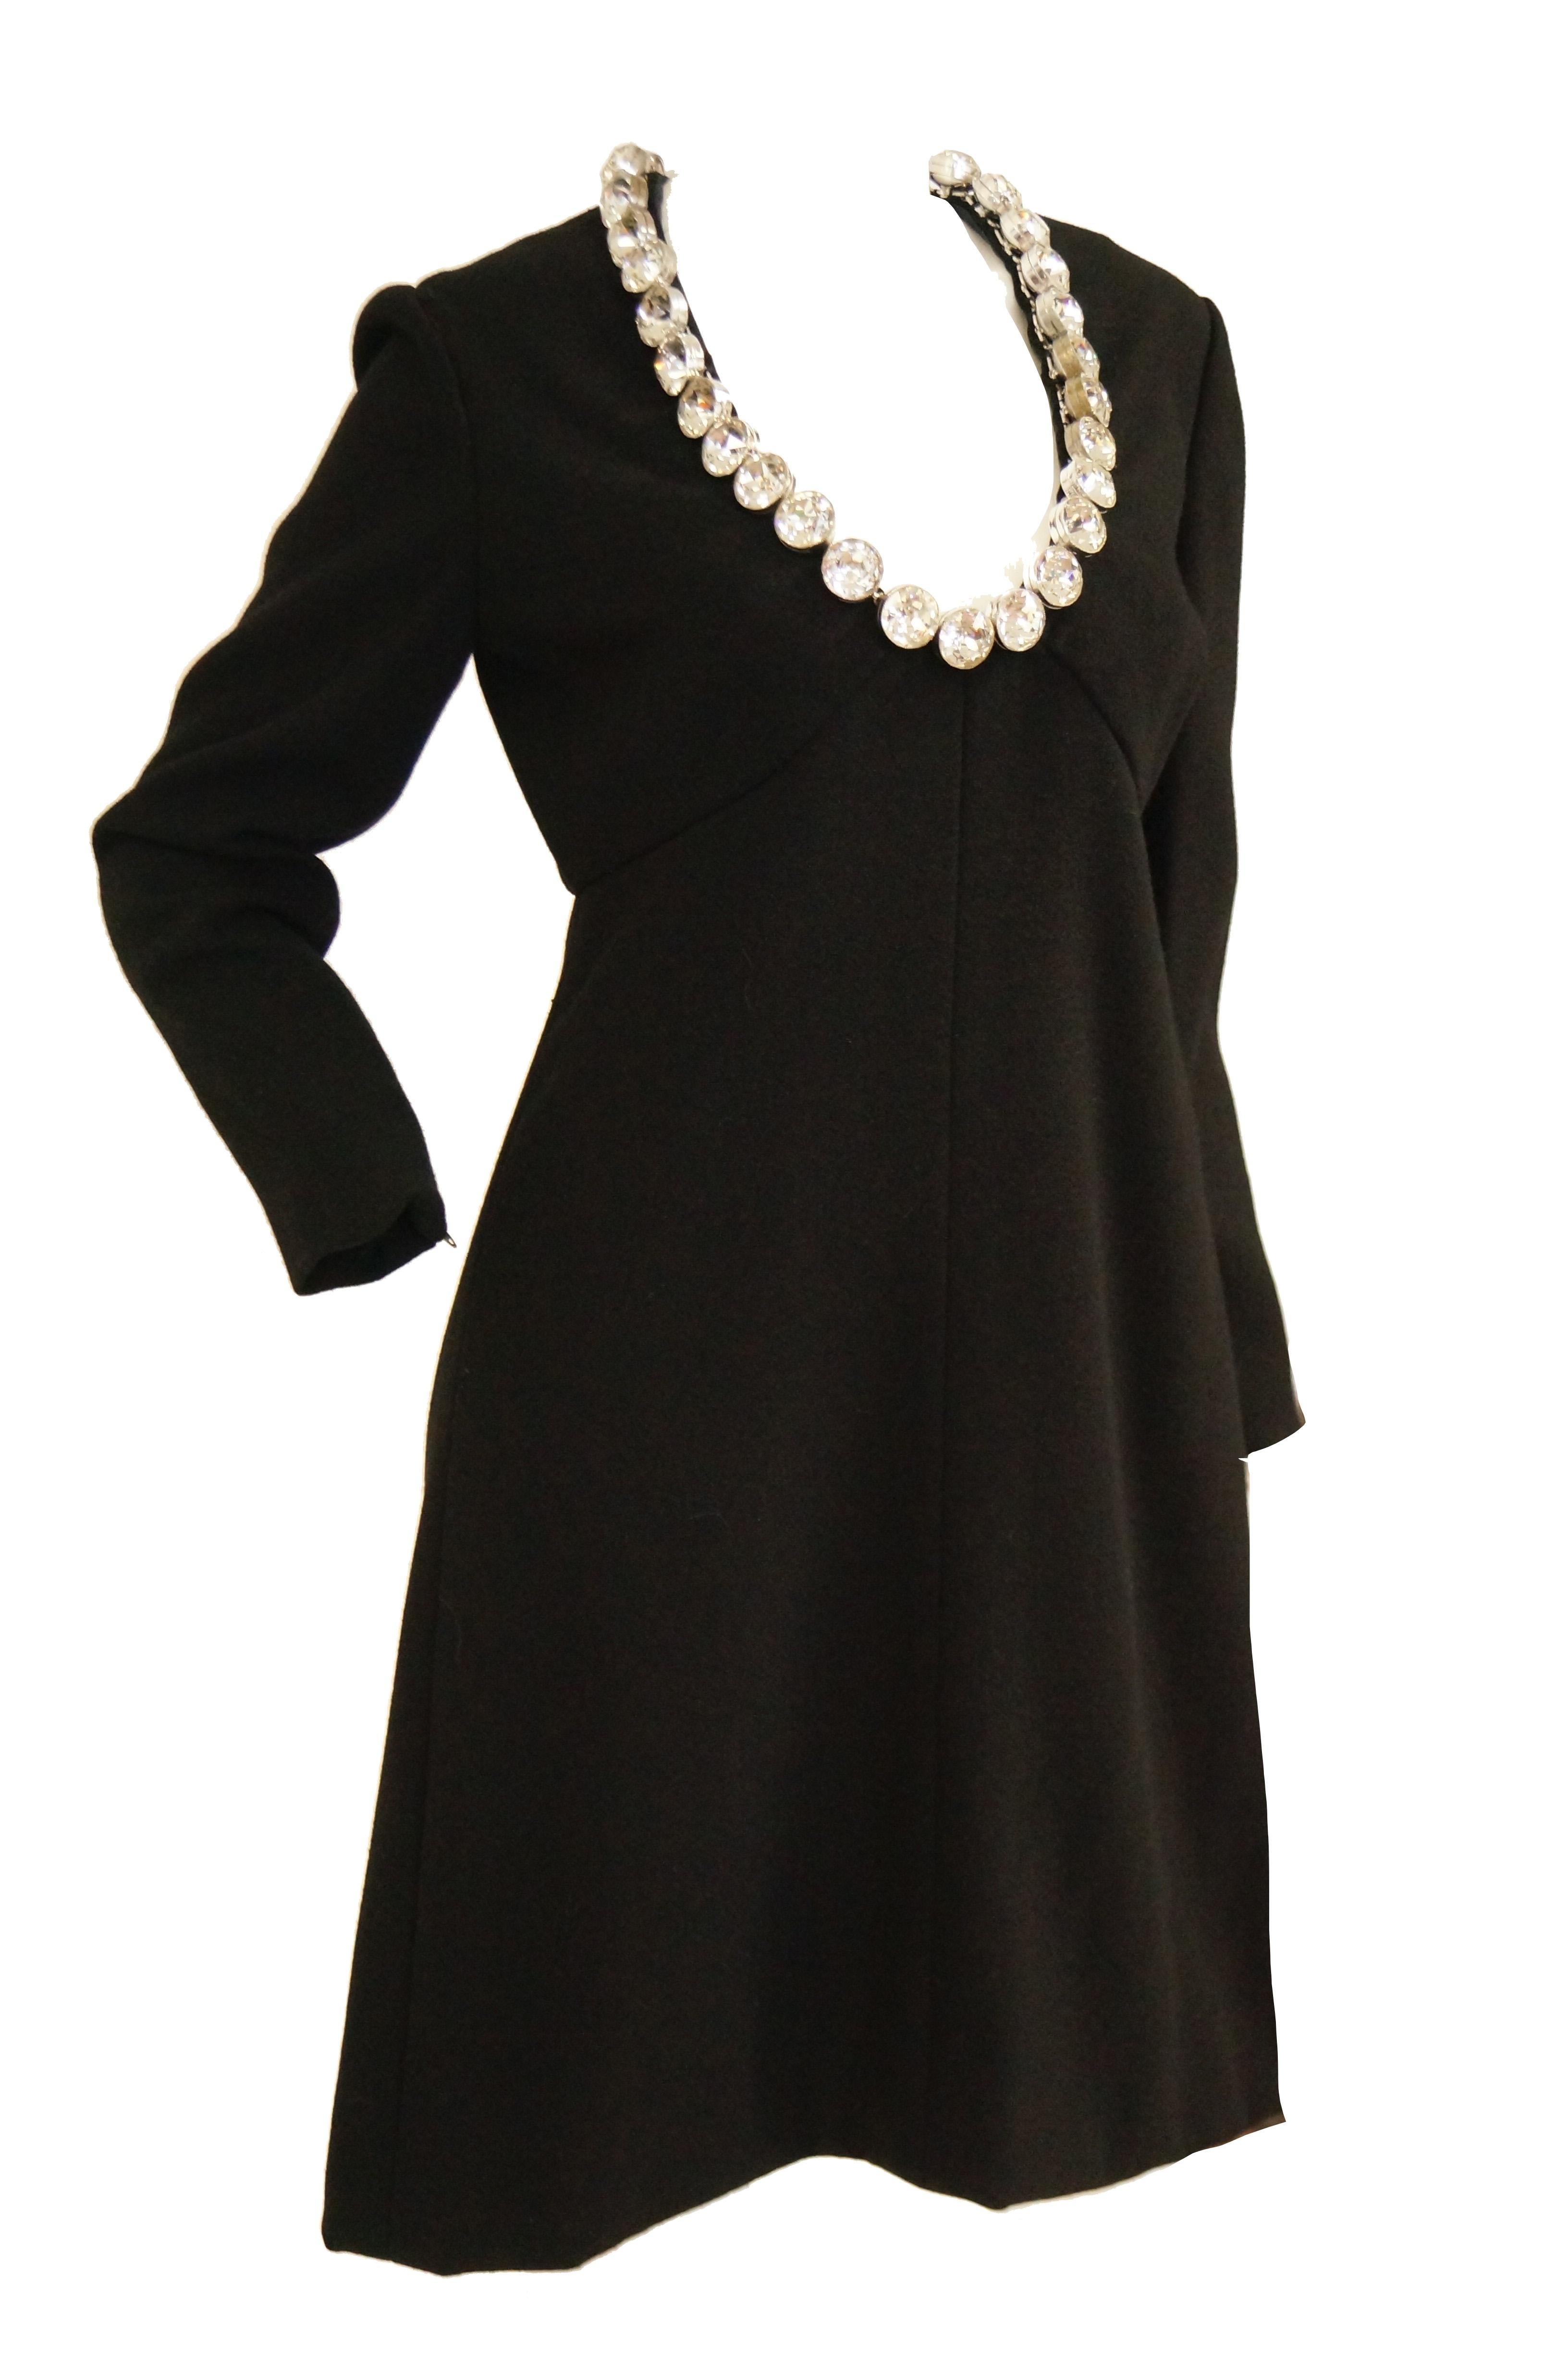 1960s Donald Brooks Black Cocktail Dress with Riviera Rhinestone Neckline In Good Condition For Sale In Houston, TX